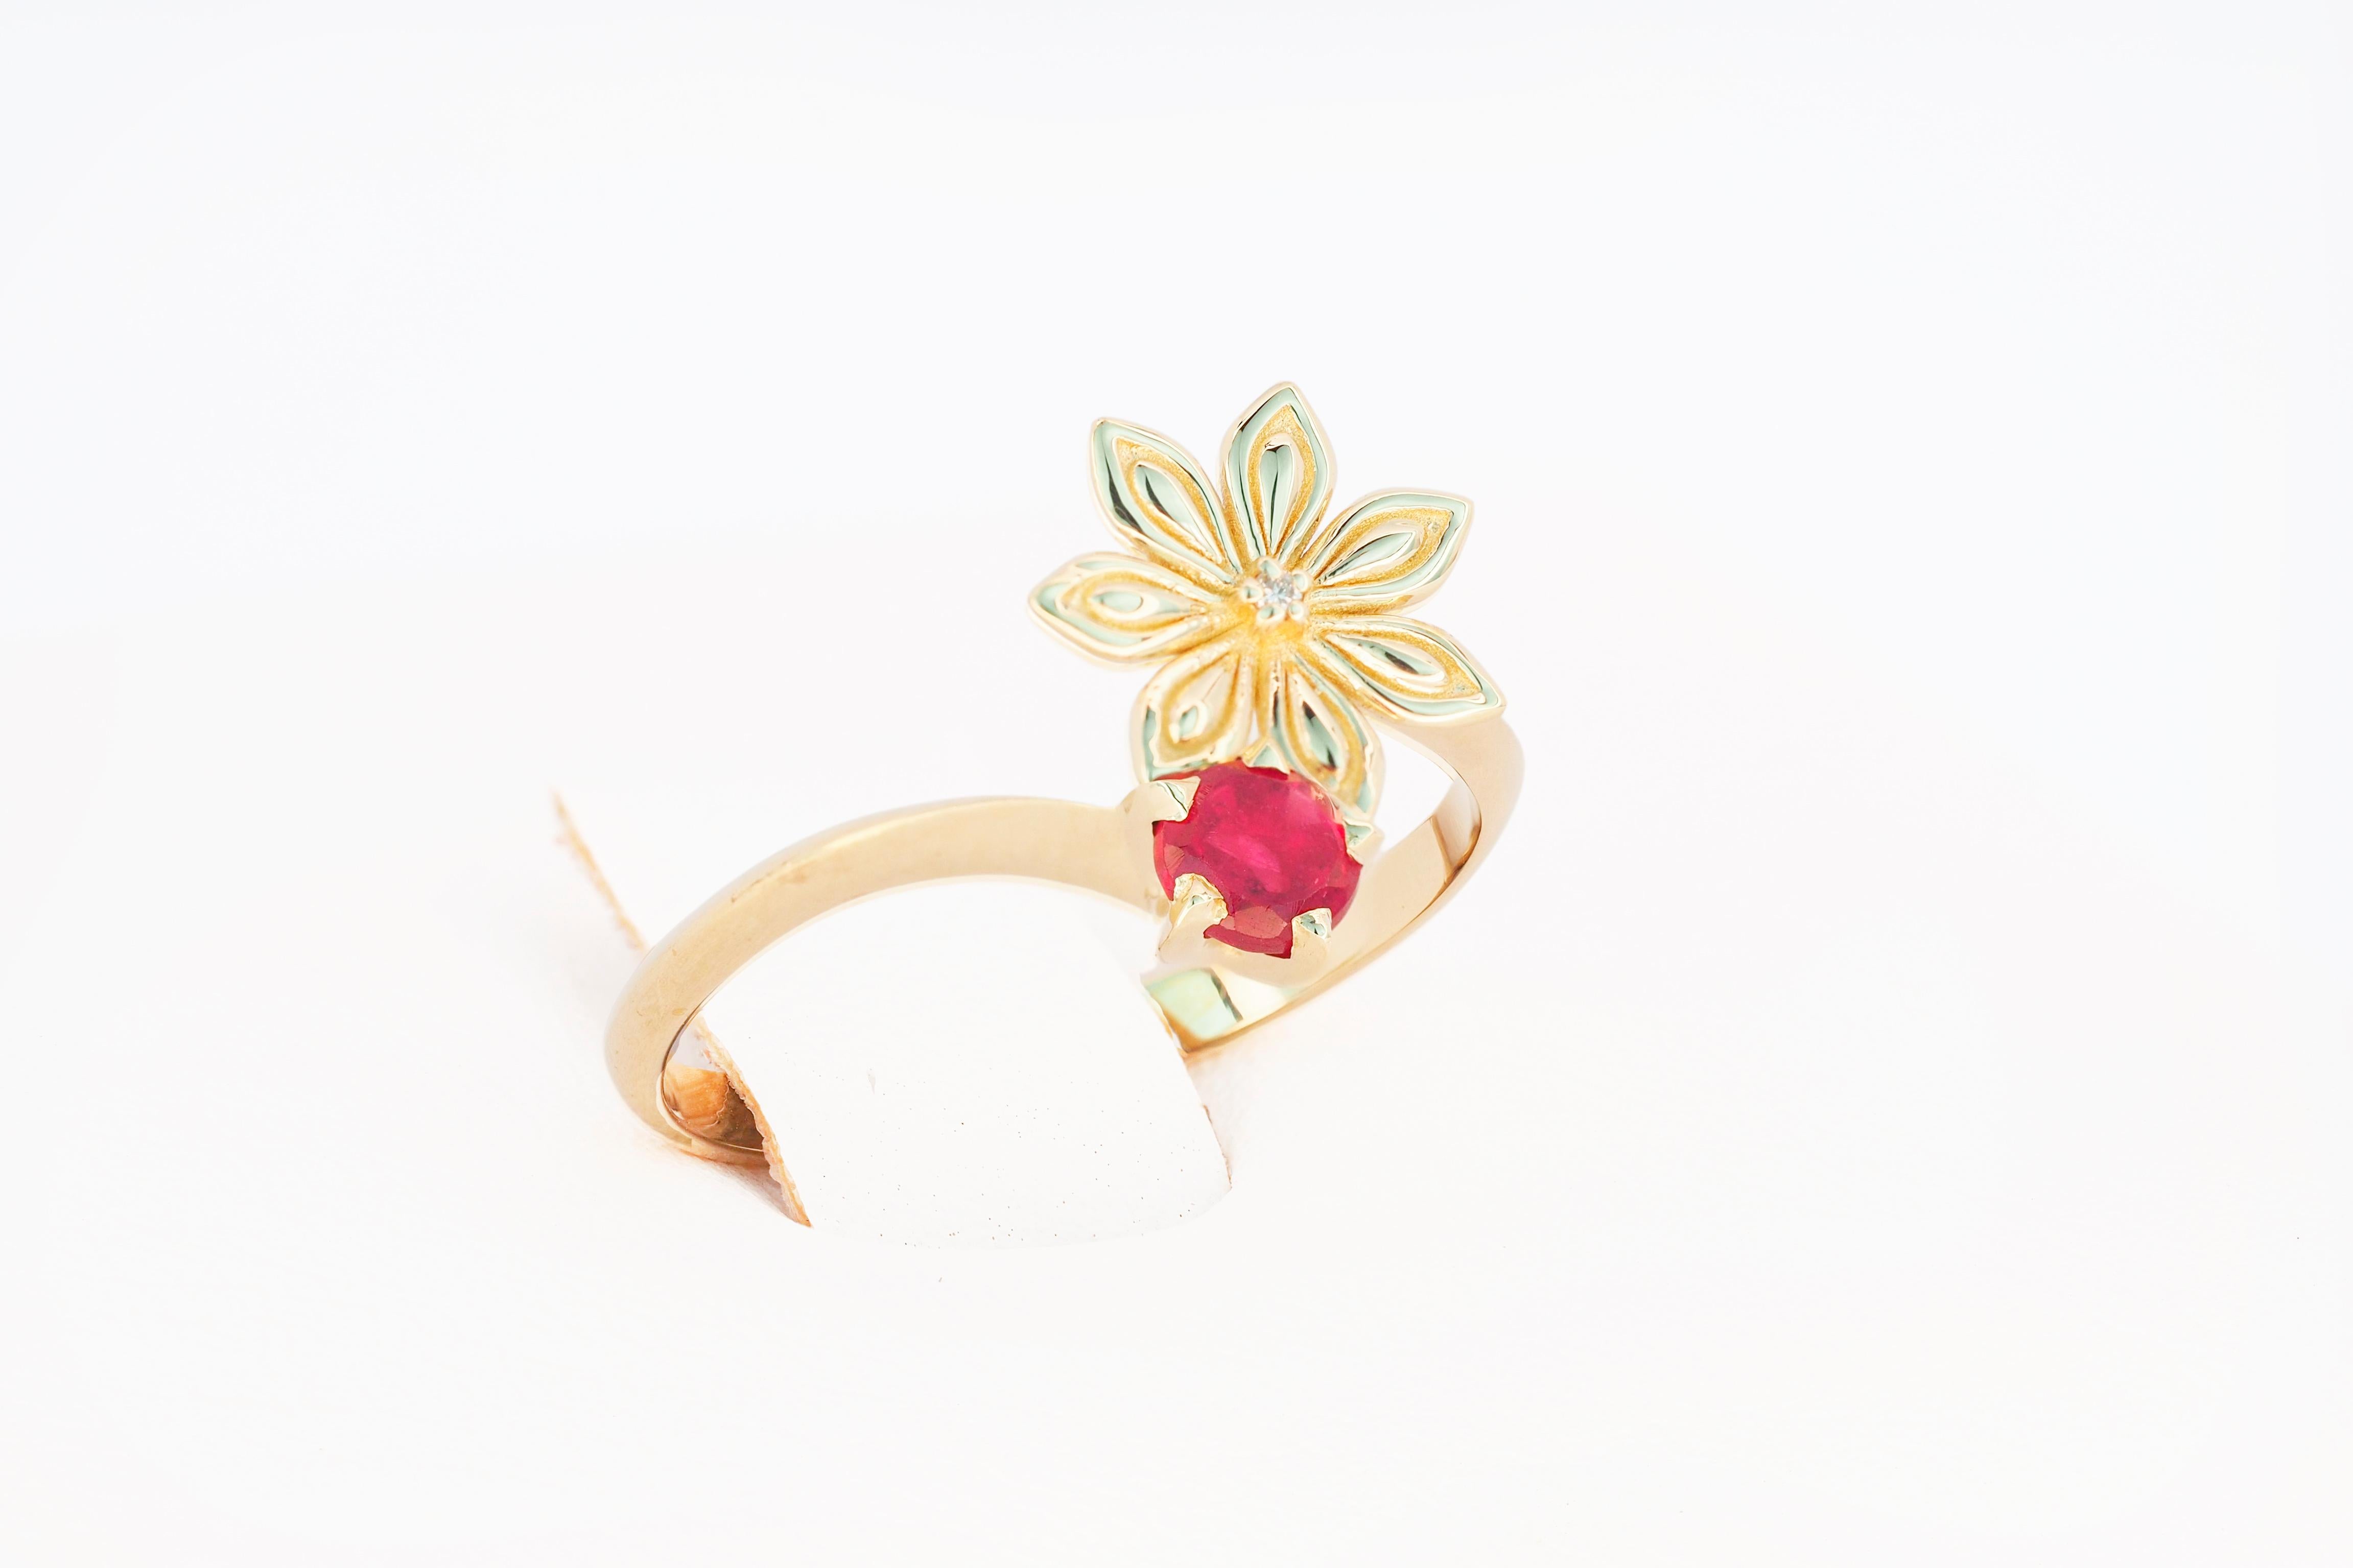 For Sale:   Ruby gold ring. 14 Karat Gold Star Anise Flower Ring. July birthstone ruby ring 8